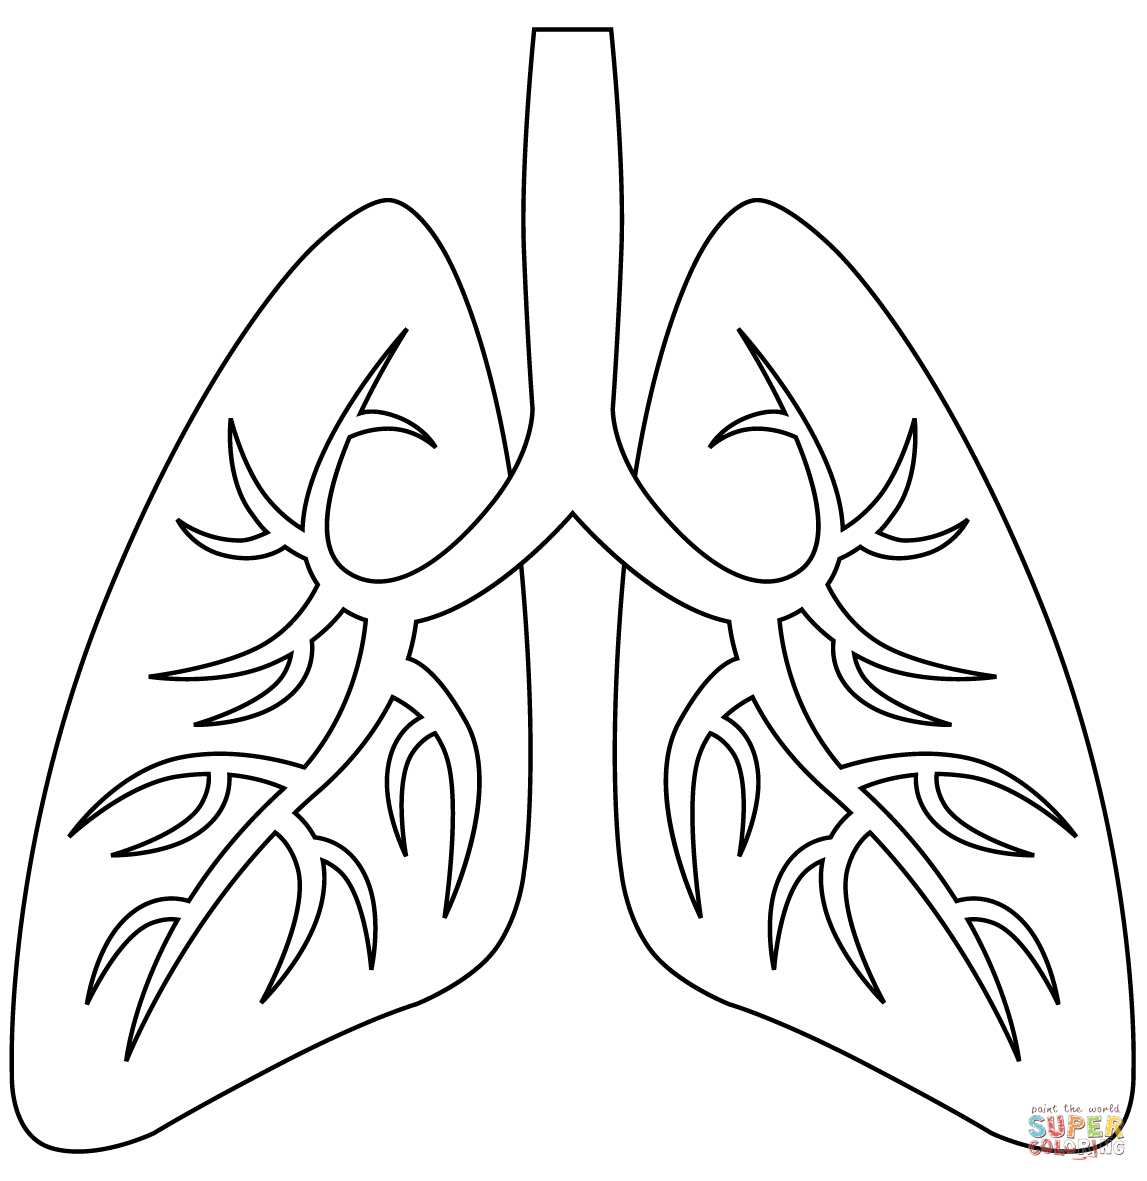 Lungs coloring page | Free Printable Coloring Pages